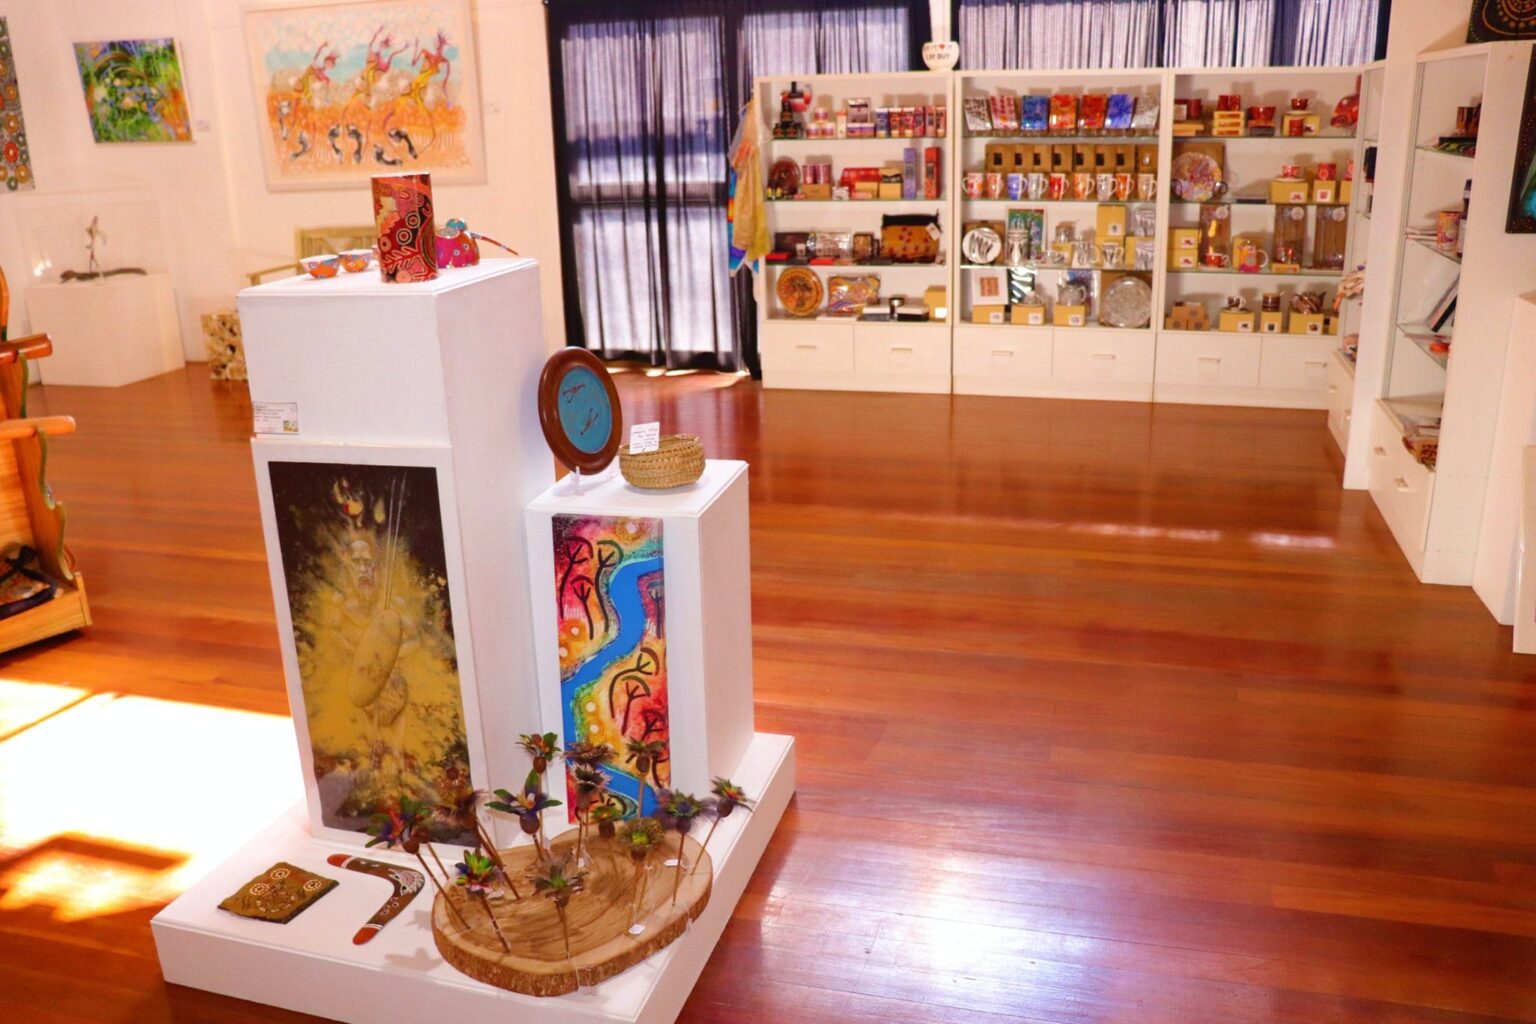 We have 6 annual Exhibitions showcasing the extraordinary talents of our Regional Artistsi